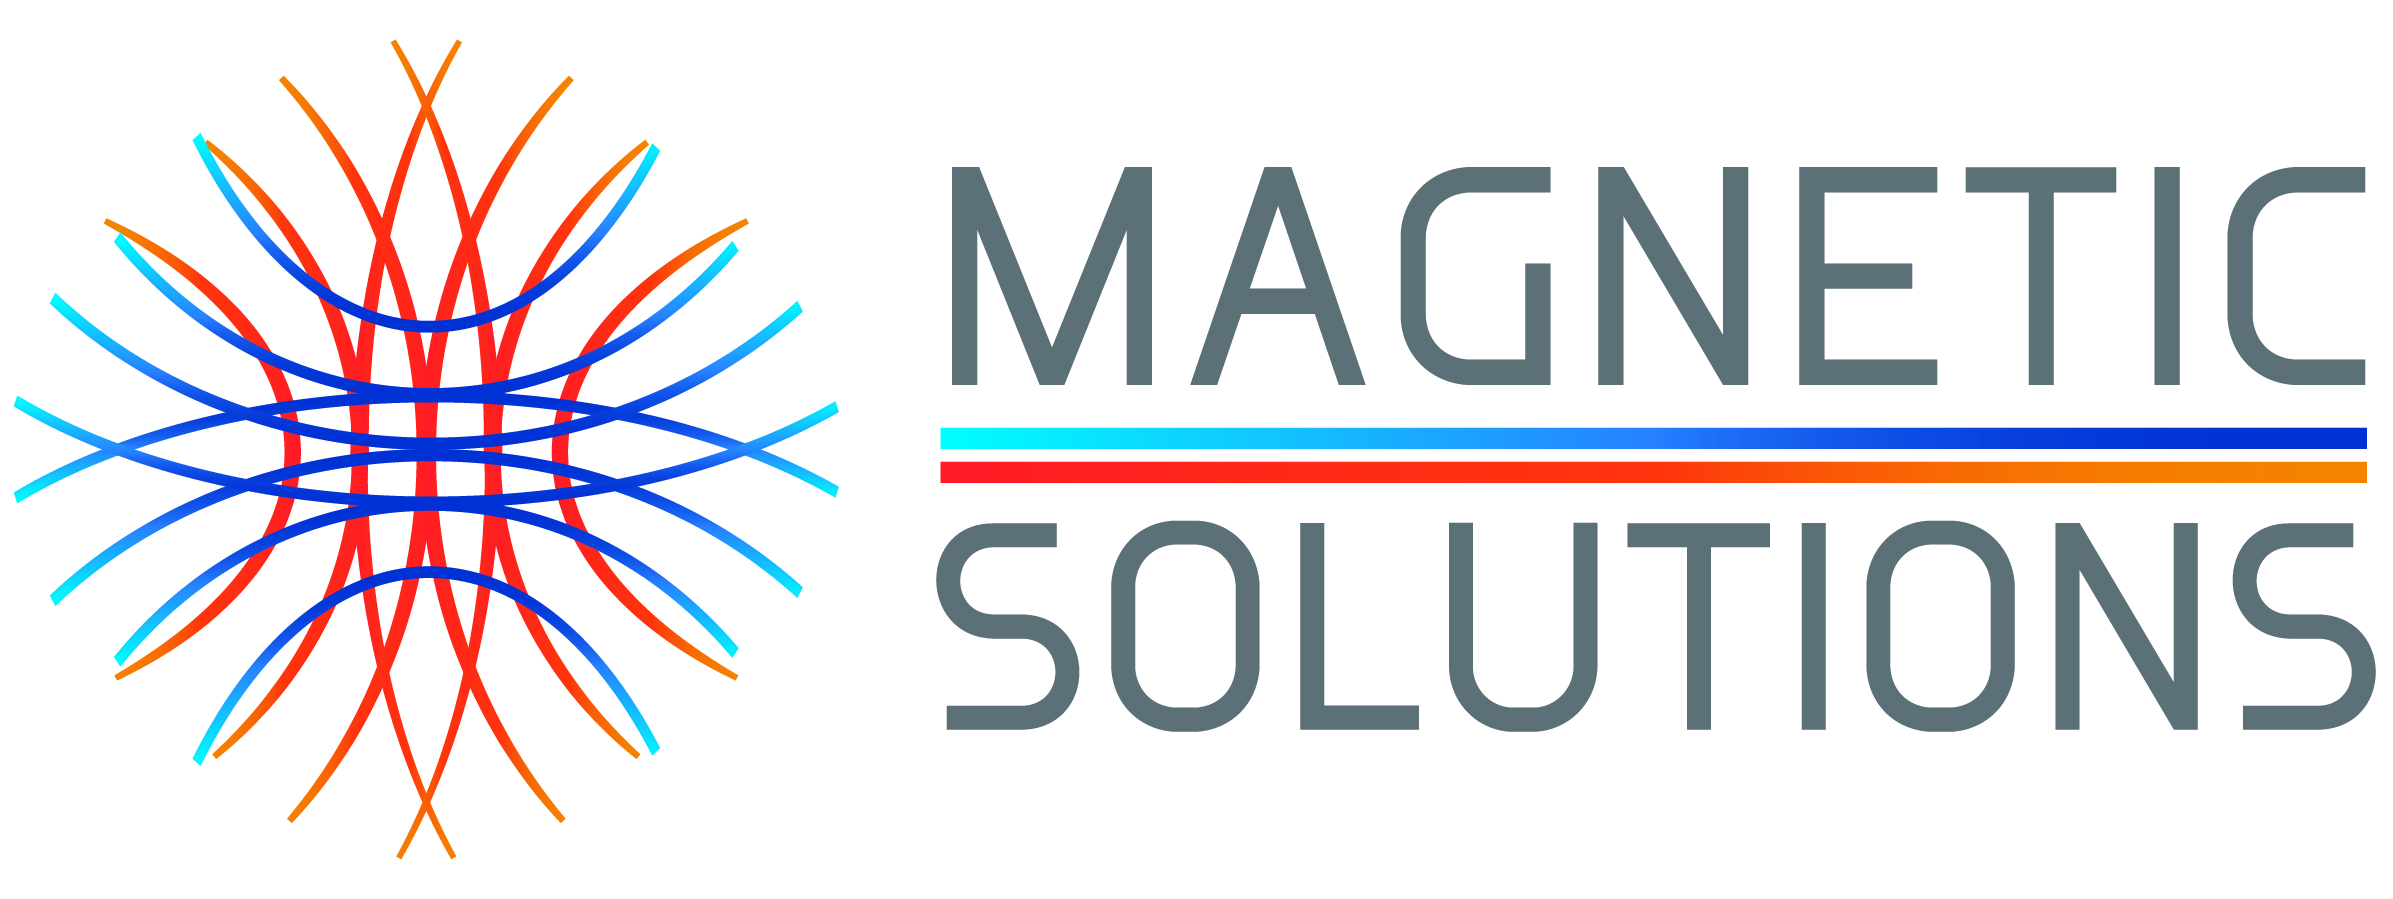 Magnetic Solutions | Industrial Magnets | Neodymium Magnets